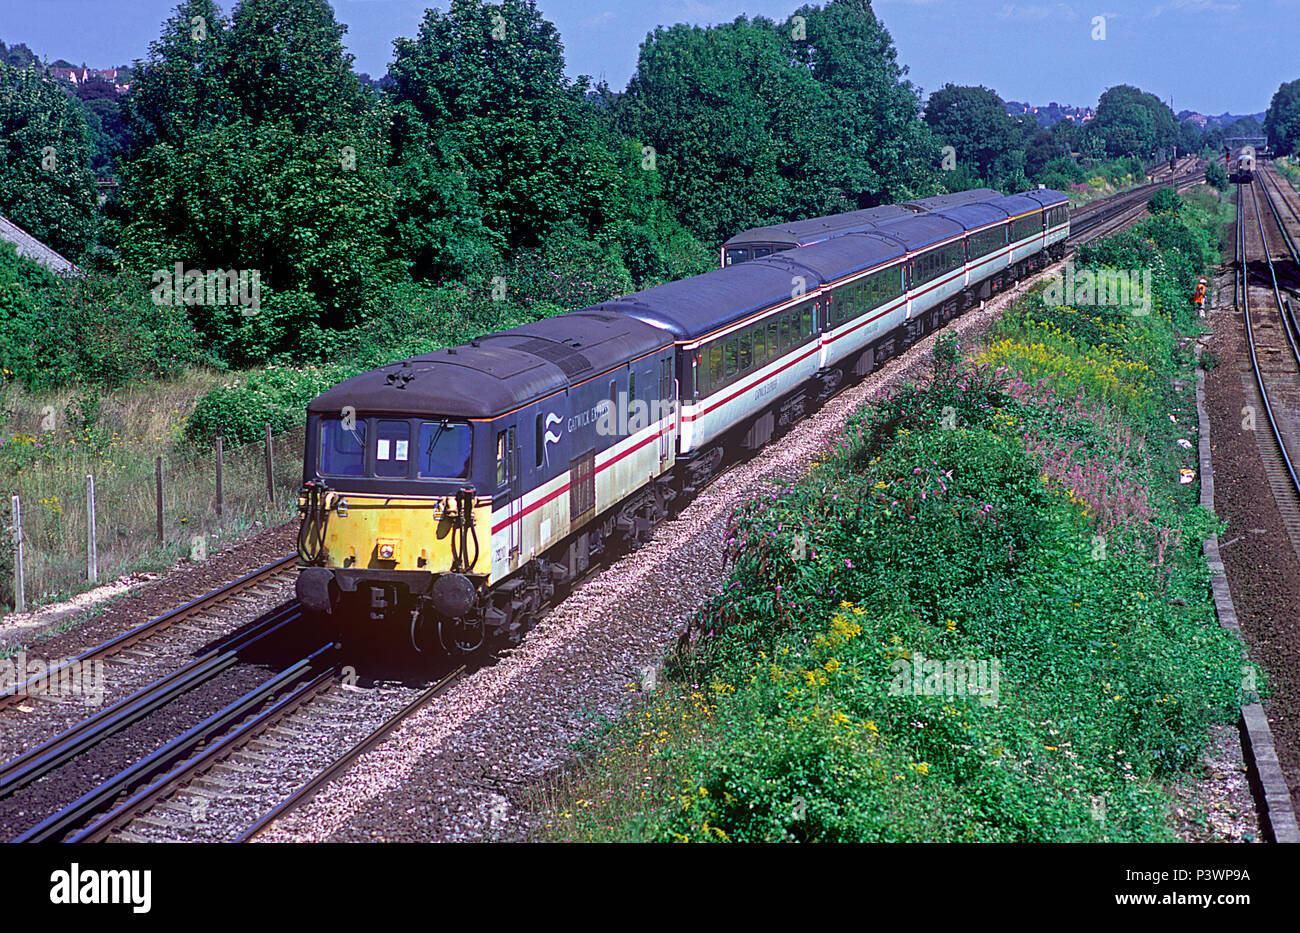 A class 73 electro diesel locomotive number 73210 working a down Gatwick  Express service at Stoats Nest Junction, Coulsdon on the 14th August 2002  Stock Photo - Alamy